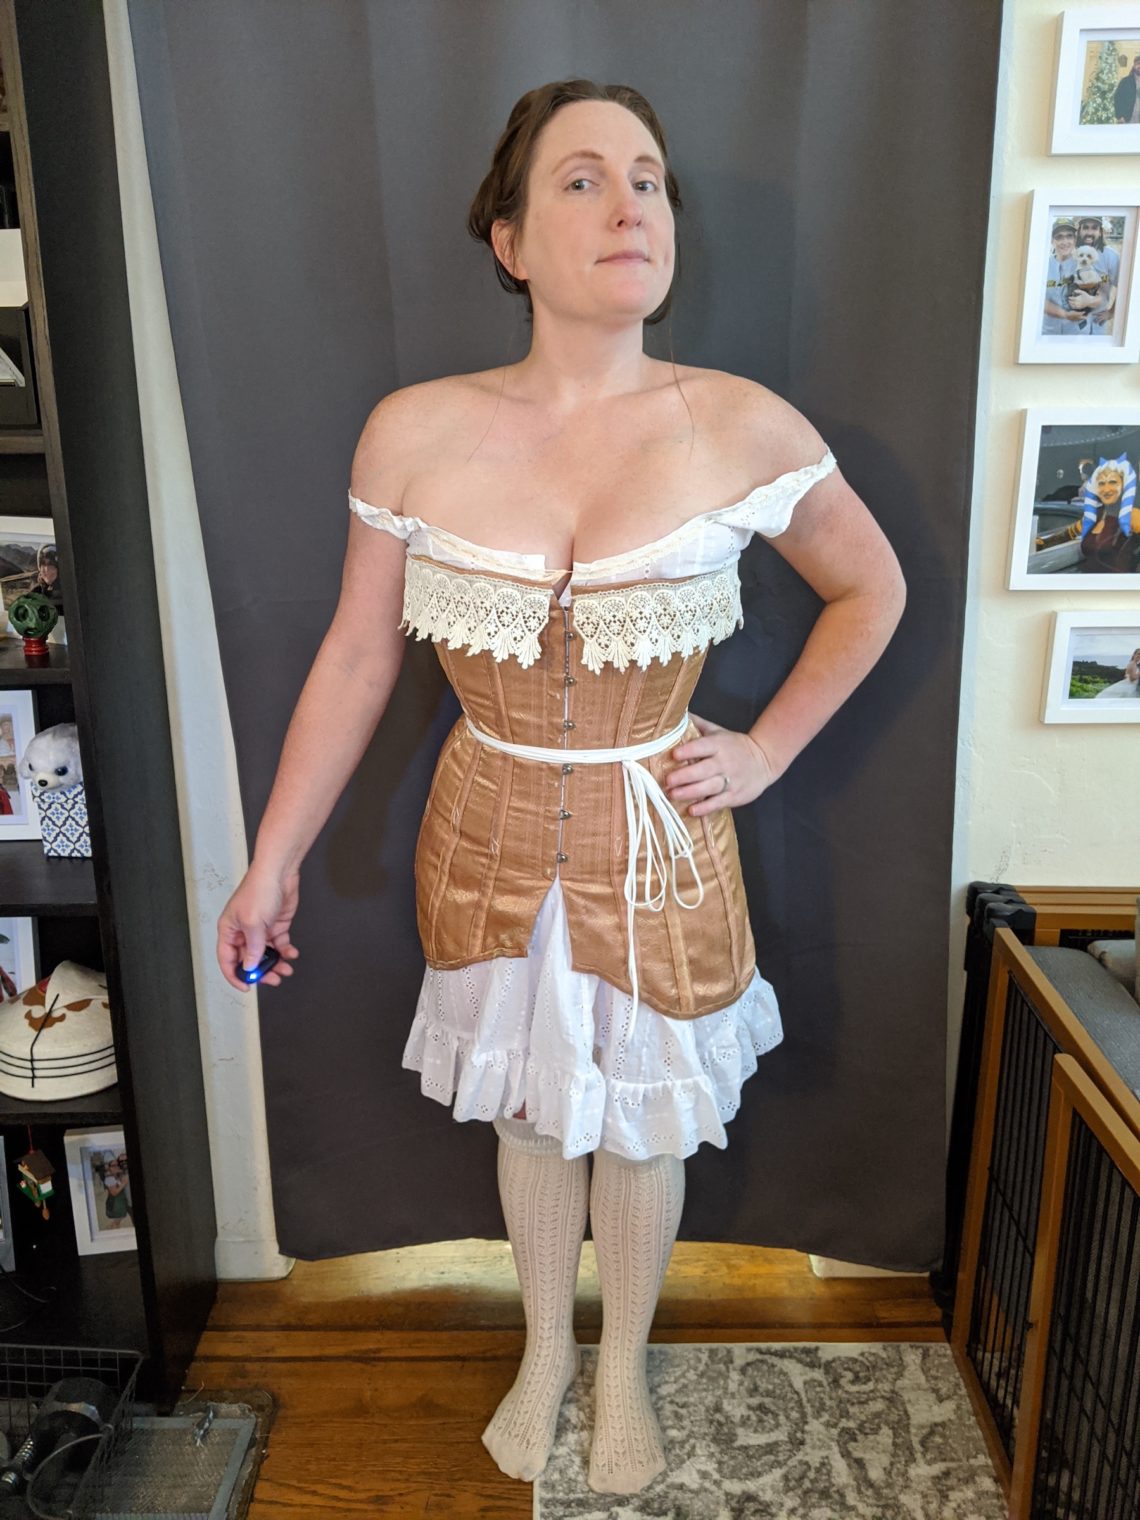 Rose - an Edwardian (1913) under-bust Corset Pattern with girdle